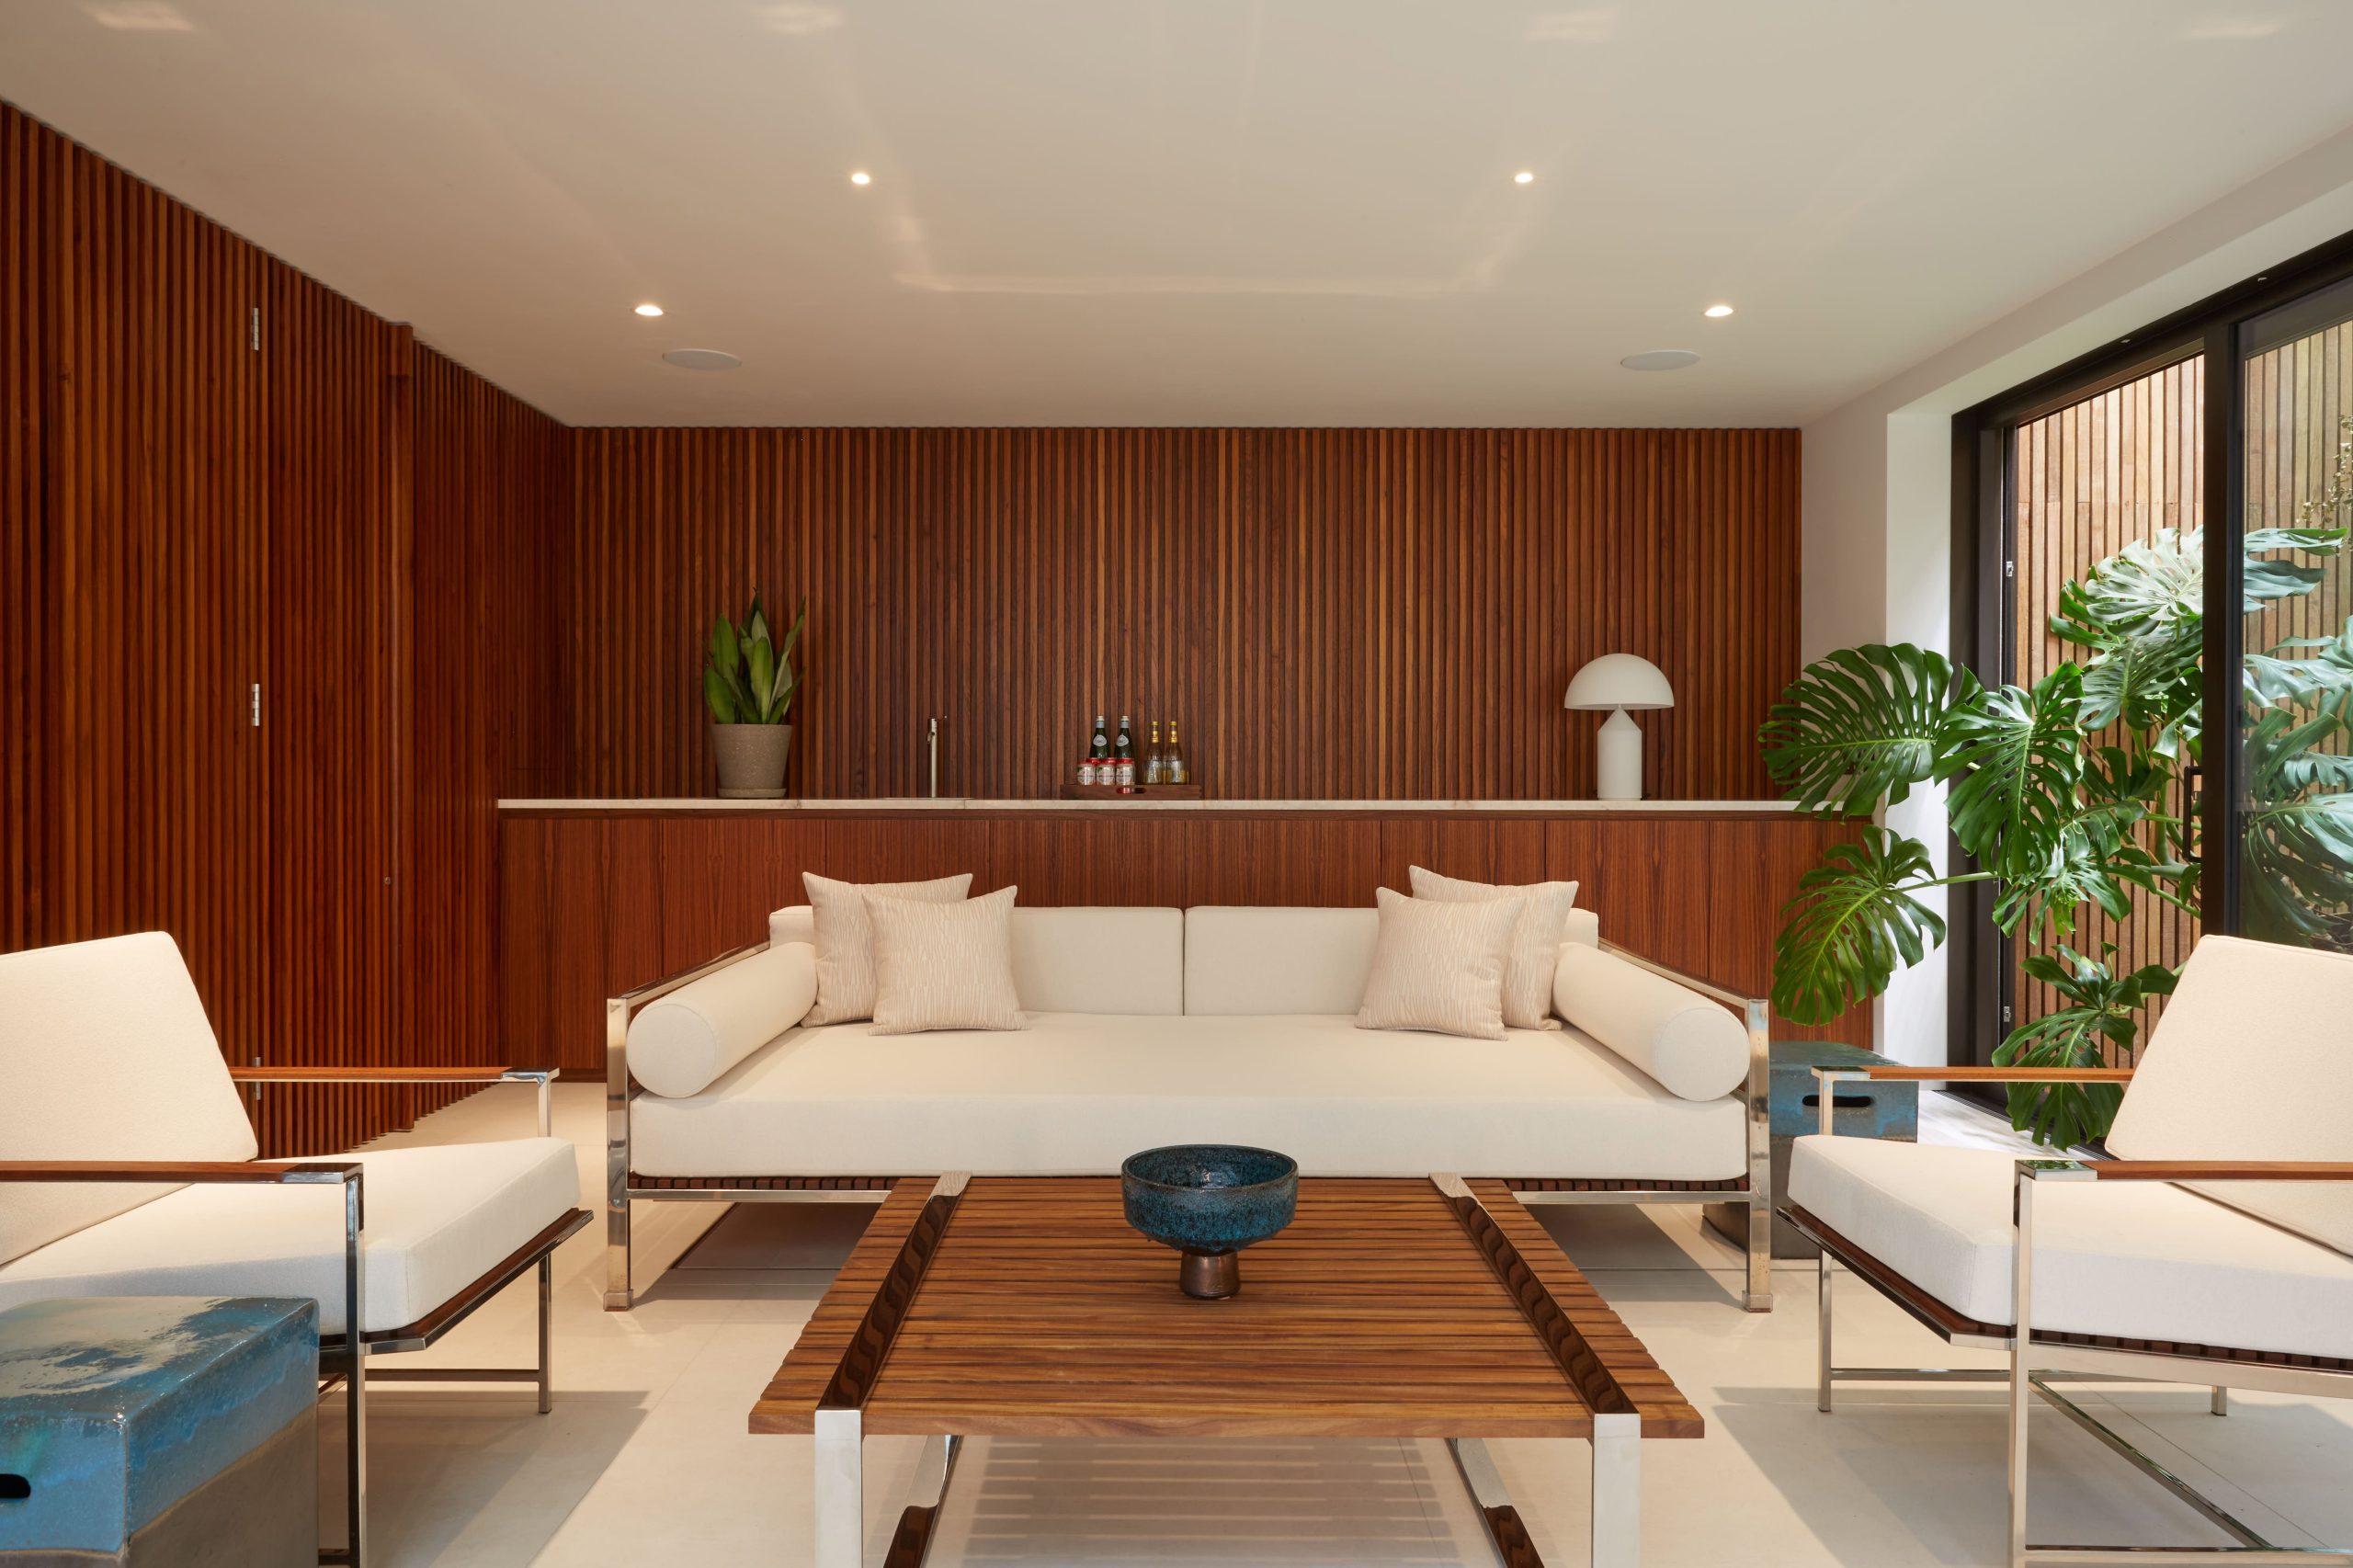 Lounge designed by Peter Mikic